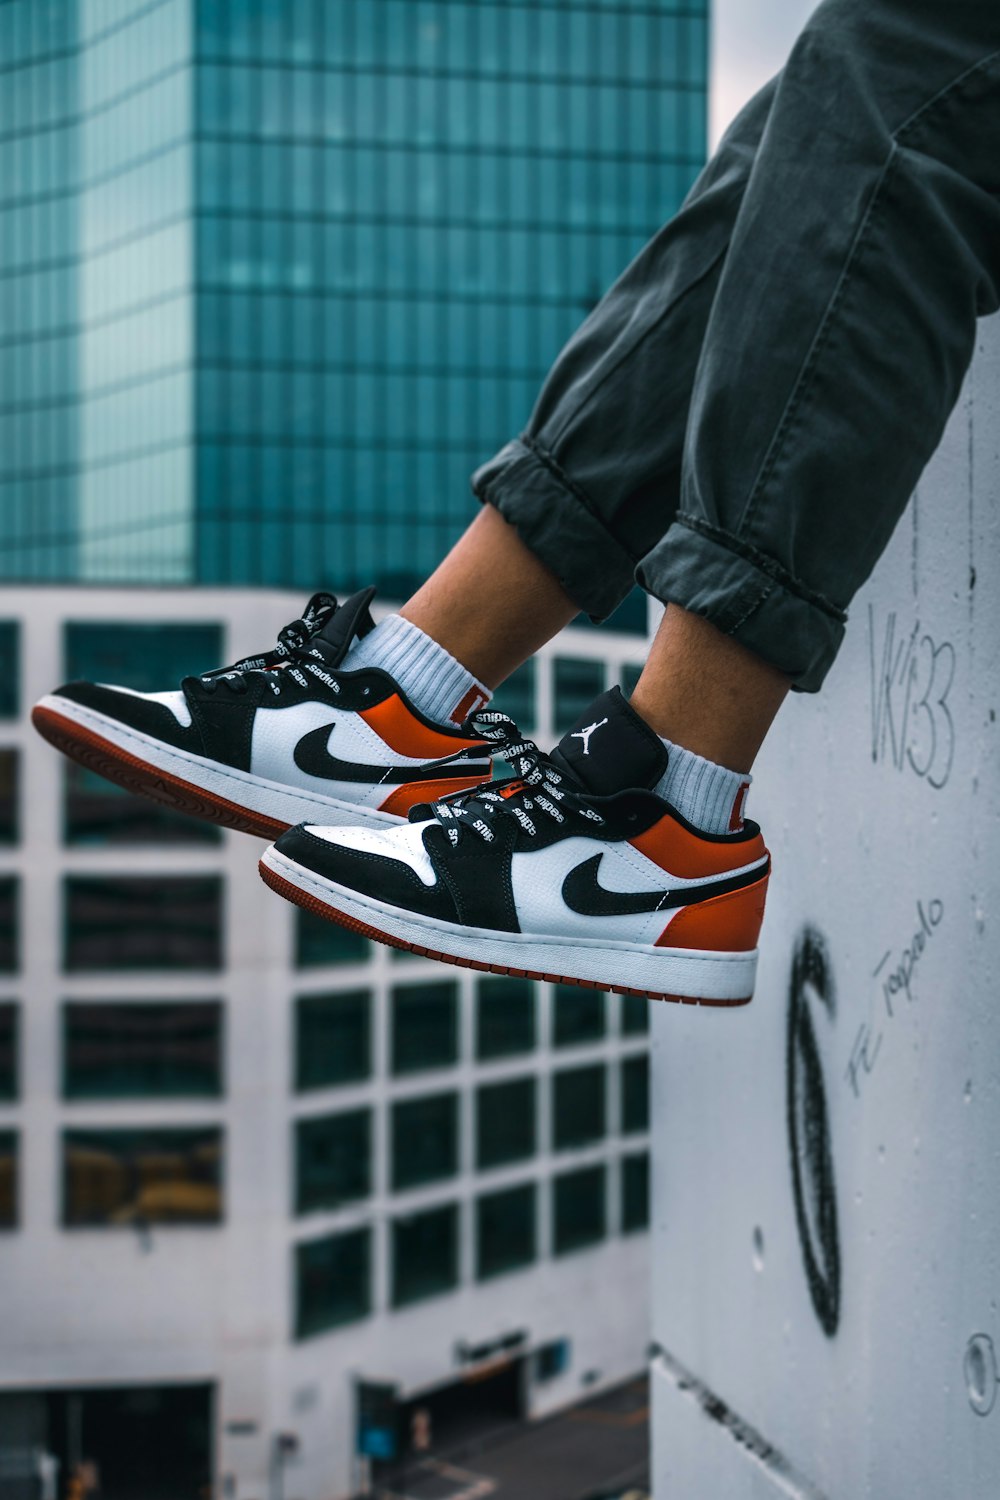 man sitting on the ledge of a building wearing Air Jordan 1 low-top shoes  photo – Free Switzerland Image on Unsplash